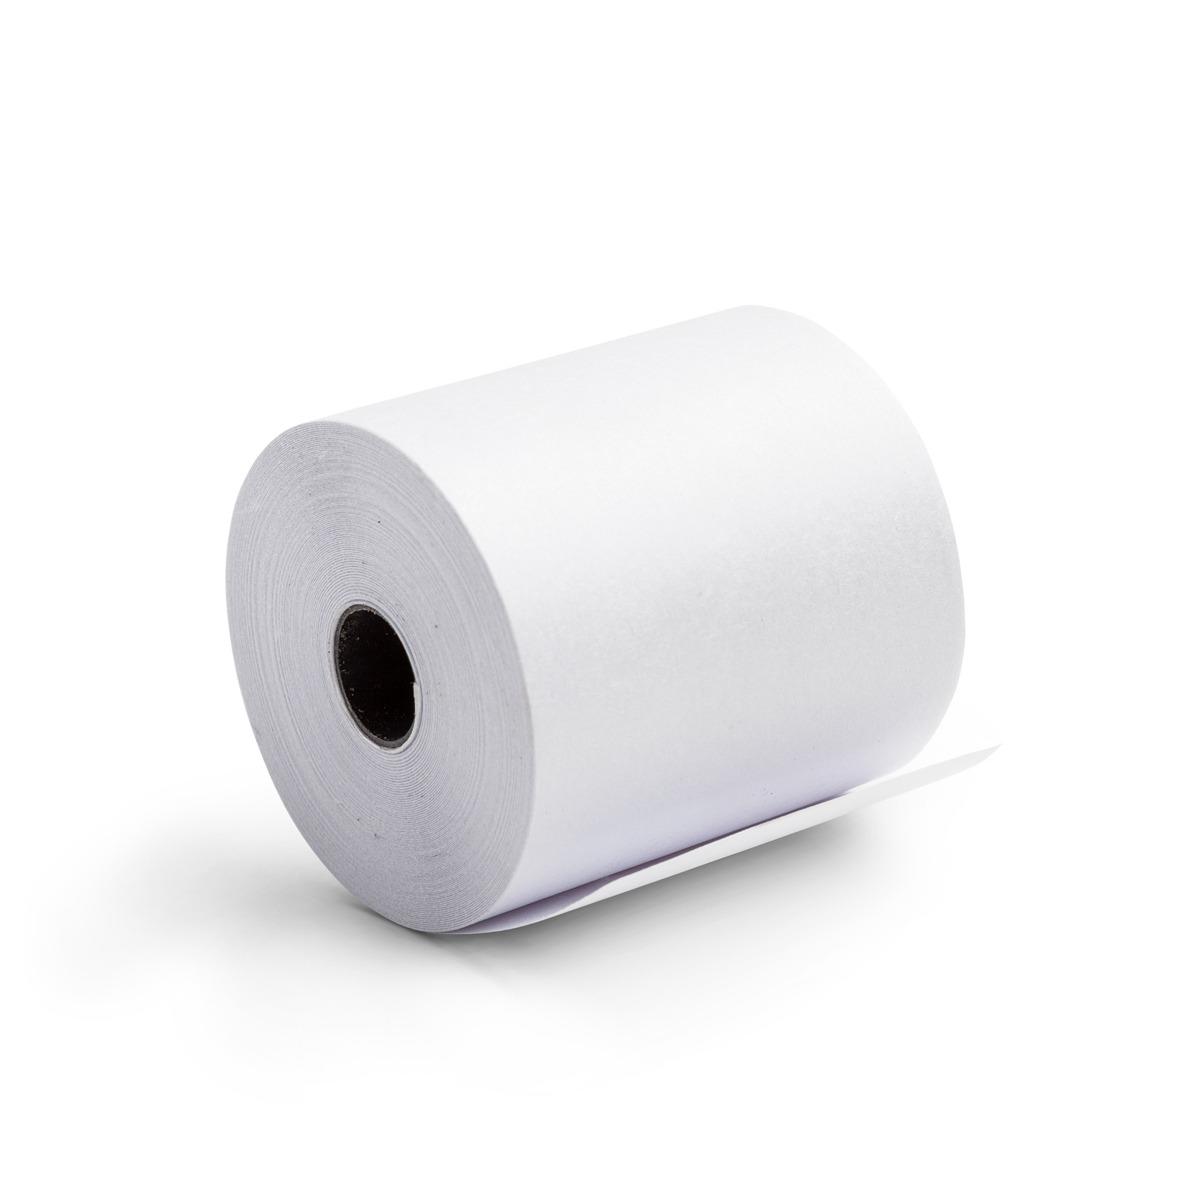 ROLLO PAPEL P/MAQ 37 MM X 50 MTS X 10 TERMICO MAUGER